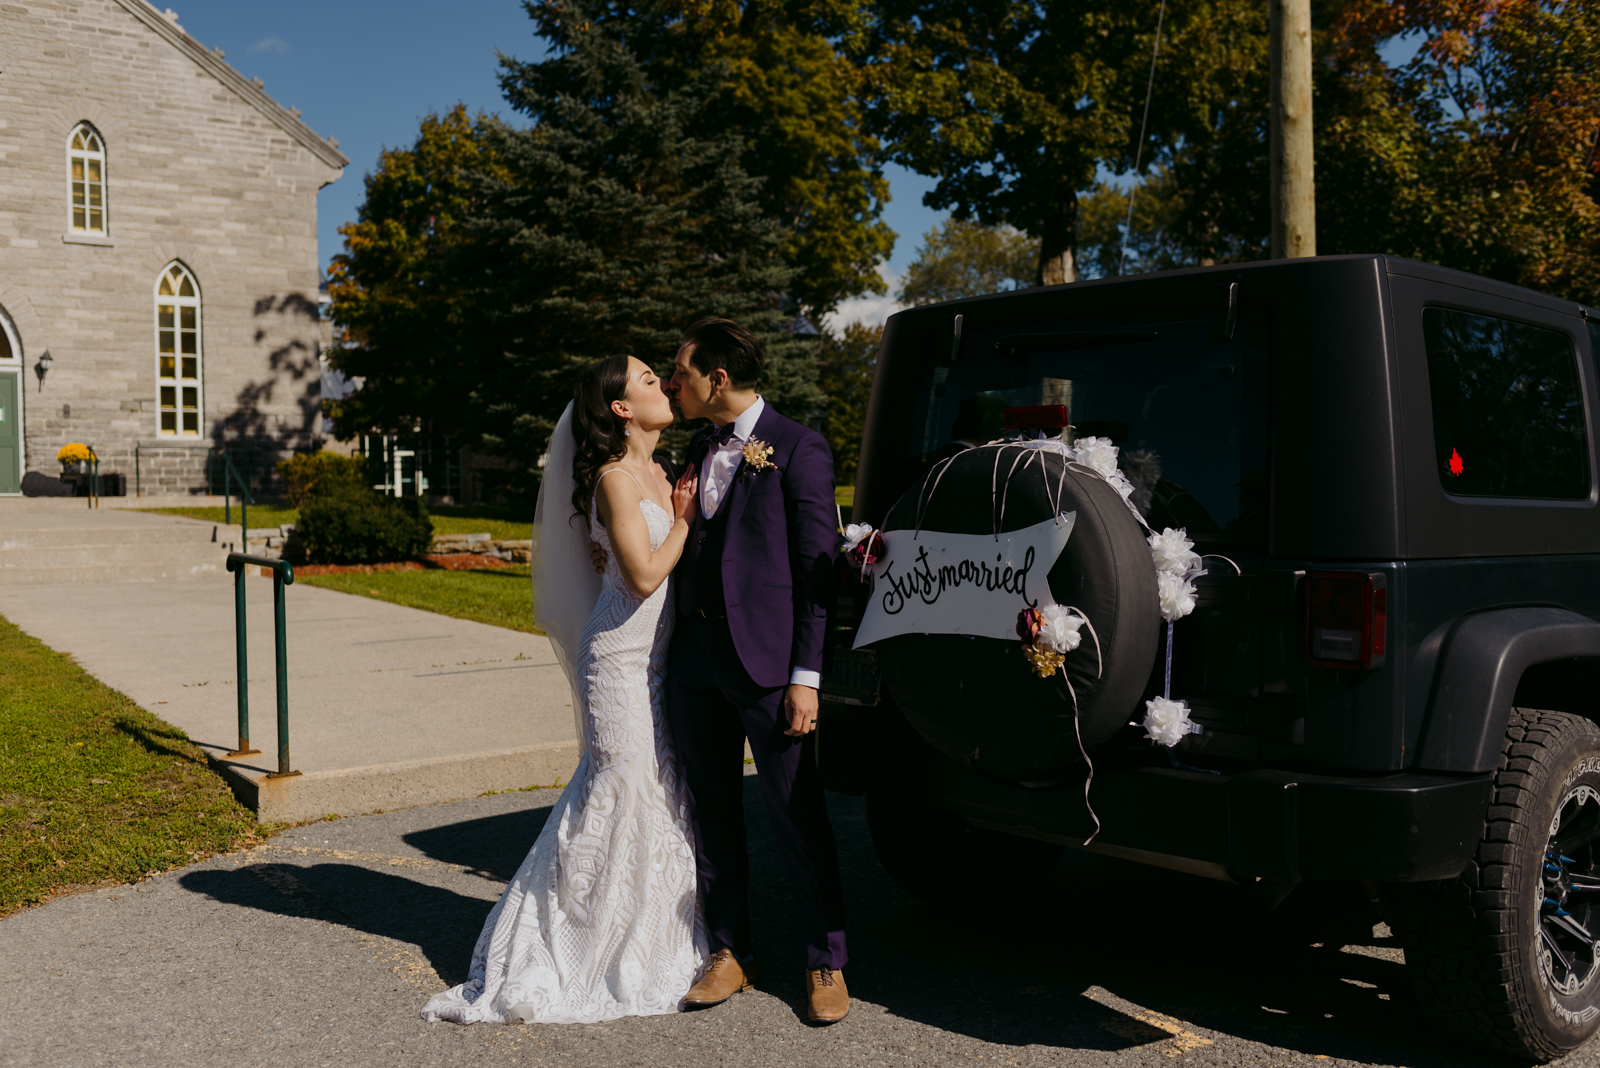 bride and groom kissing next to jeep wrangler with "just married" sign on it